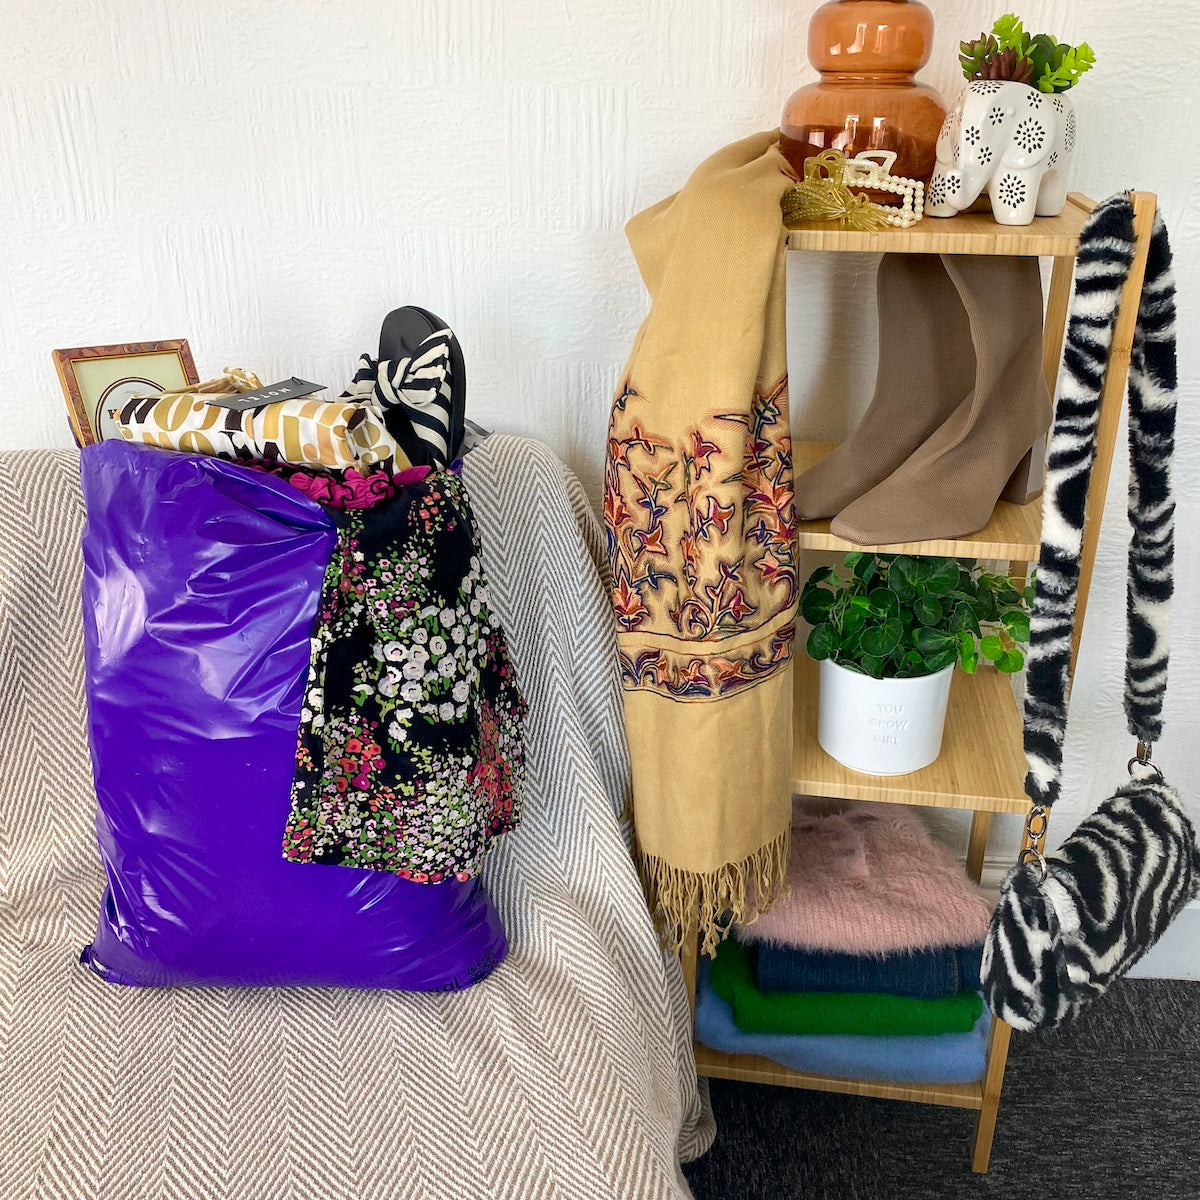 Womens clothes filling a purple mailer bag which is sitting on a chair next to shelves that have shoes, clothes, bags and ornaments on it